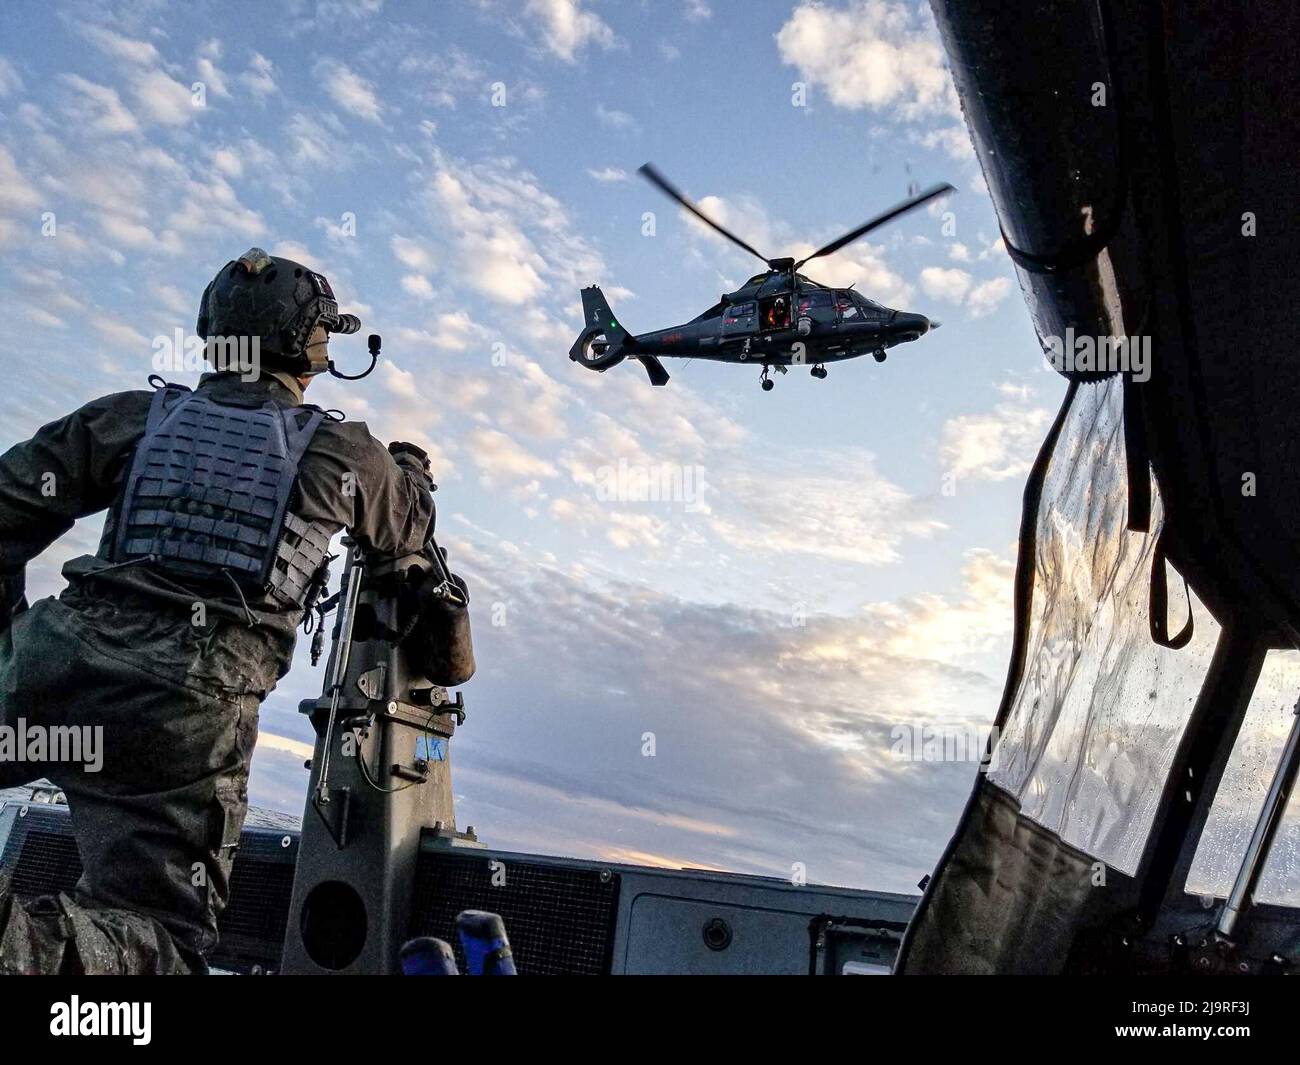 A member of U.S. Naval Special Warfare Task Unit Europe (NSWTU-E) guides a host nation MEDEVAC air asset on final approach to conduct a hoist at sea during Exercise Trojan Footprint 22 in Lithuania, May 3, 2022. Trojan Footprint is the premier Special Operations Forces (SOF) exercise in Europe that focuses on fortifying military readiness, cultivating trust and developing lasting relationships which promote peace and stability throughout Europe. (U.S. Army photo by Sgt. Stanford Toran) Stock Photo